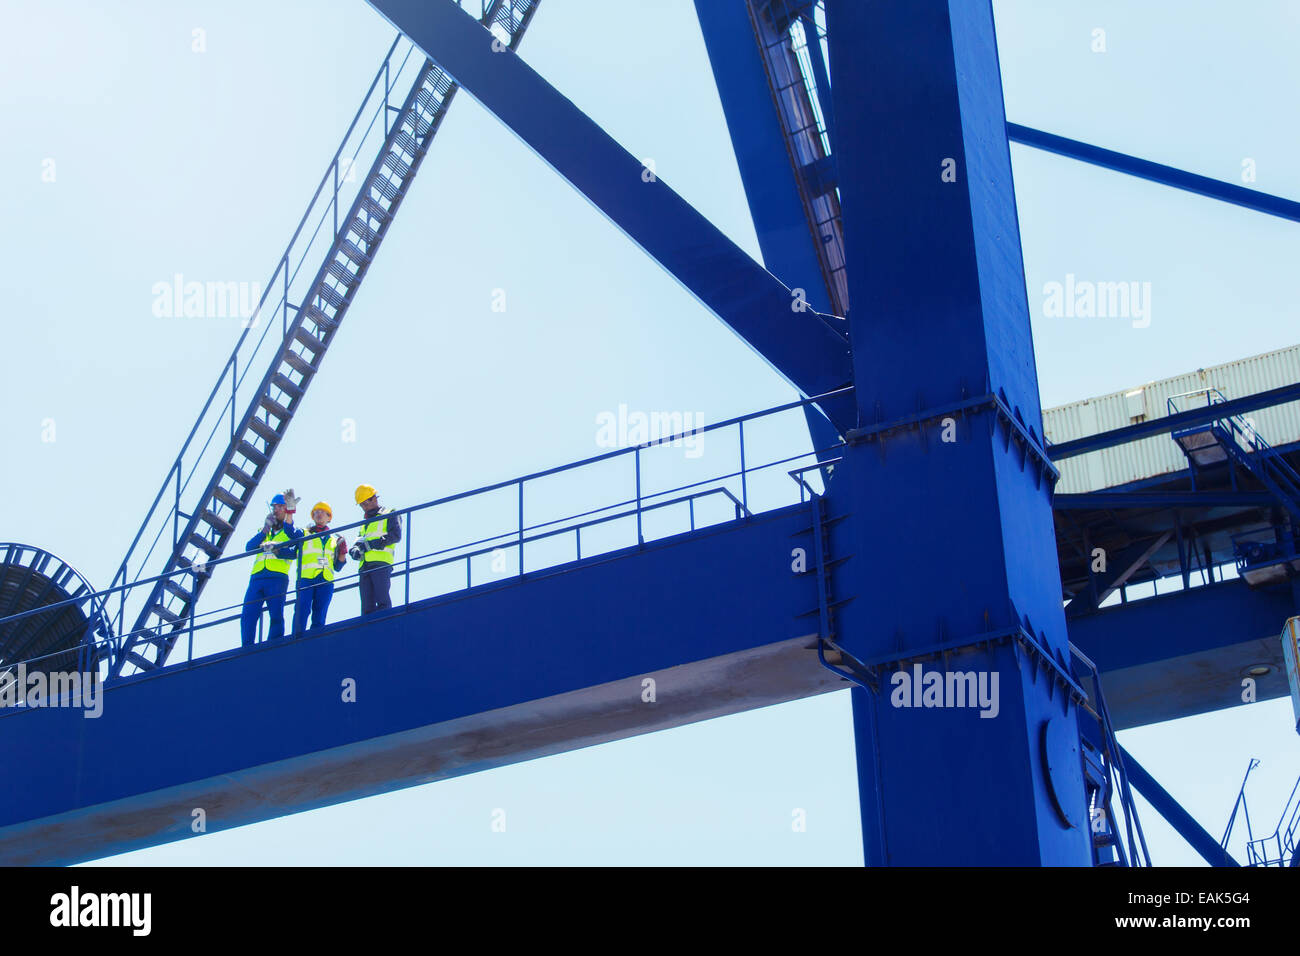 Low angle view of workers sur grue de chargement Banque D'Images